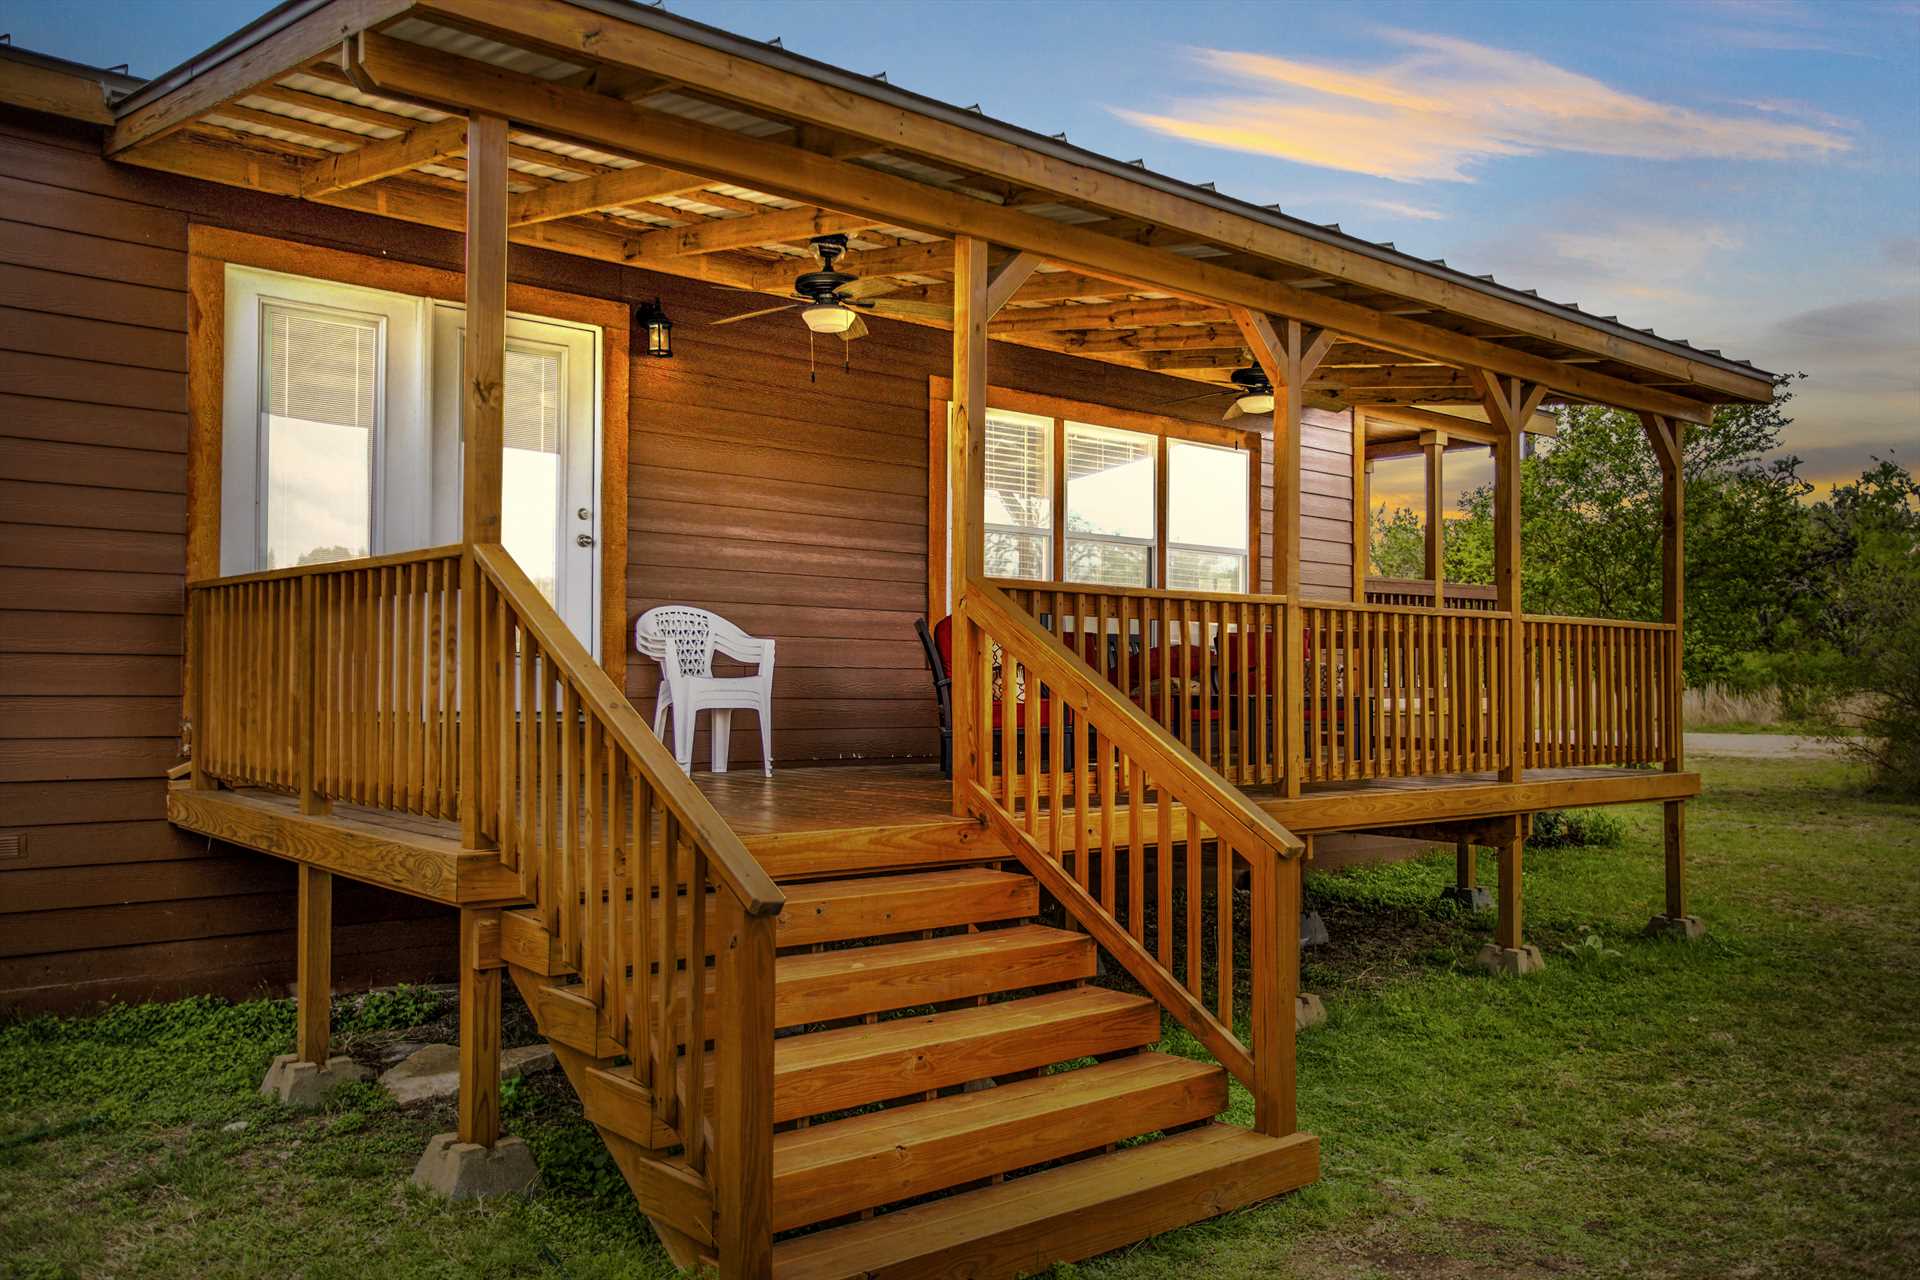                                                 There's an almost golden glow to the side deck at the Hideaway-and the Hill Country views are amazing, too!